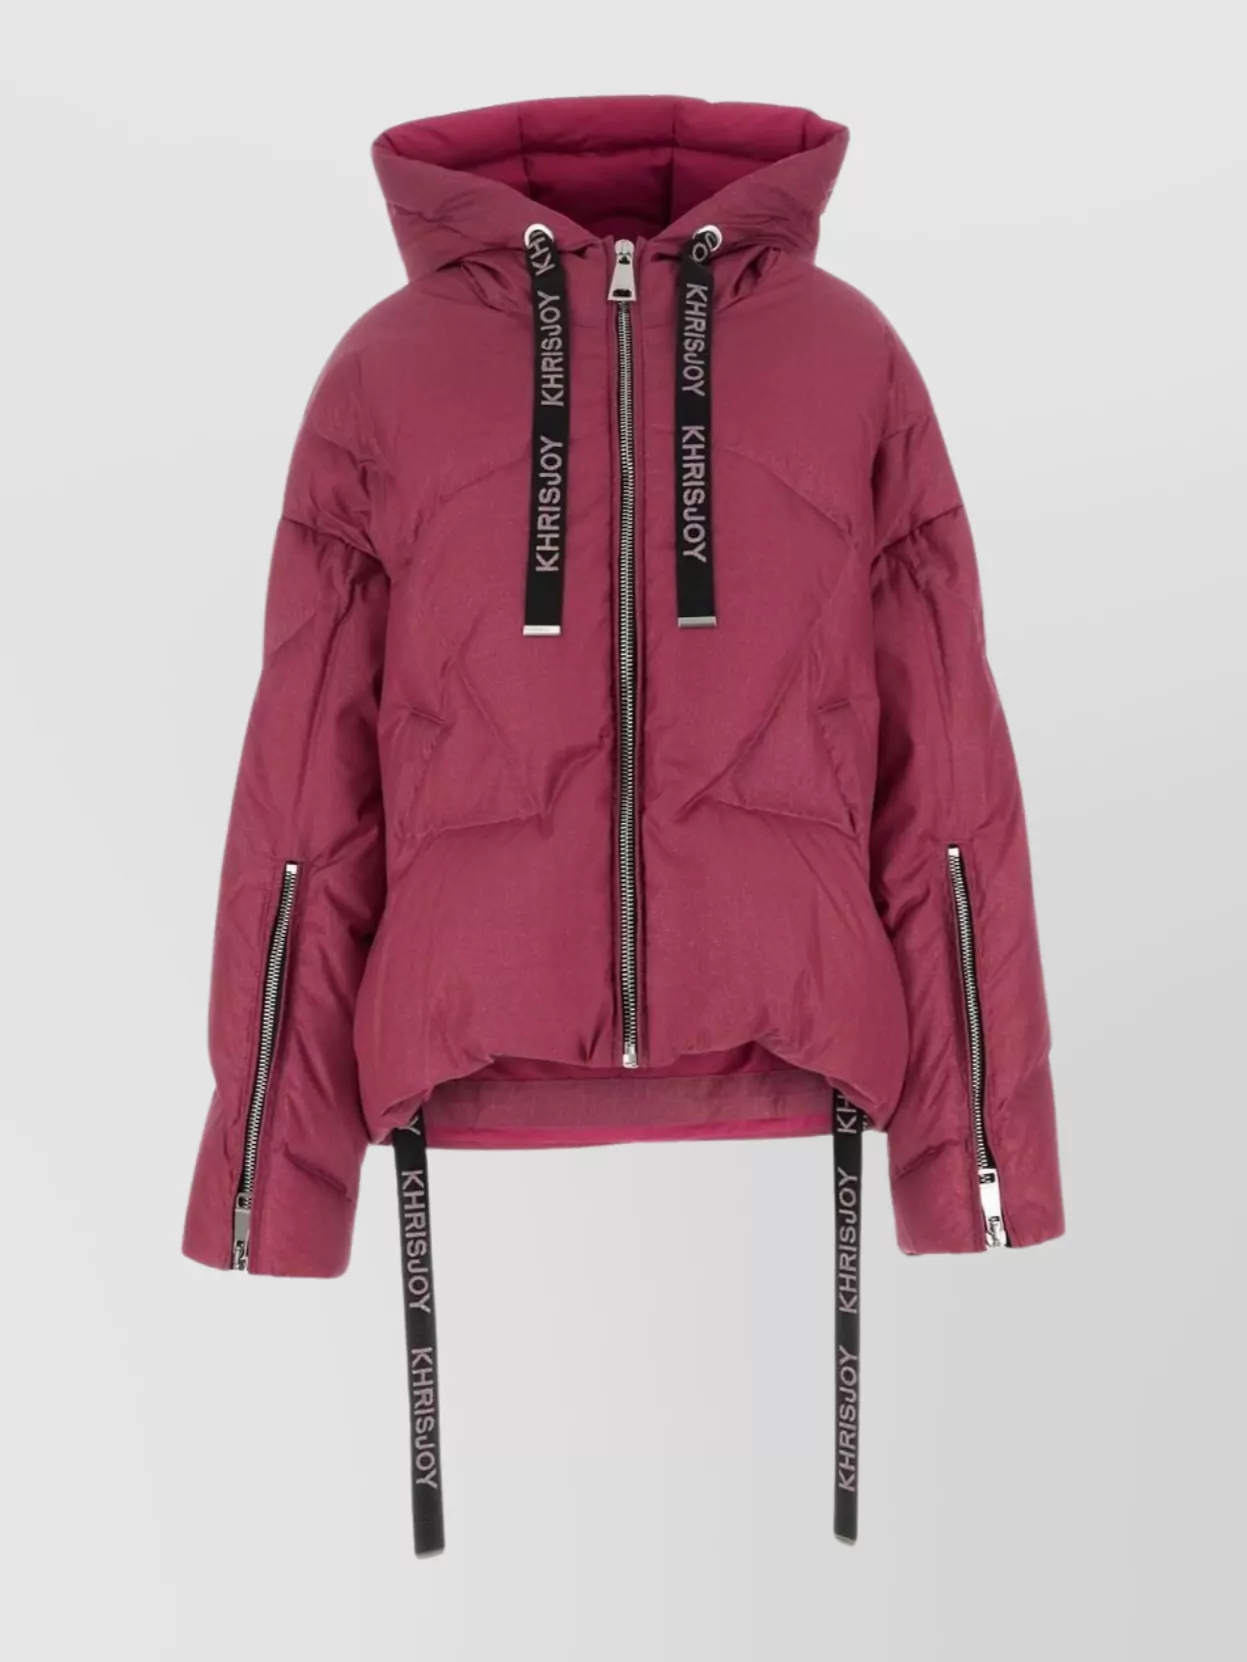 Shop Khrisjoy Tyrian Purple Polyester Iconic Down Jacket